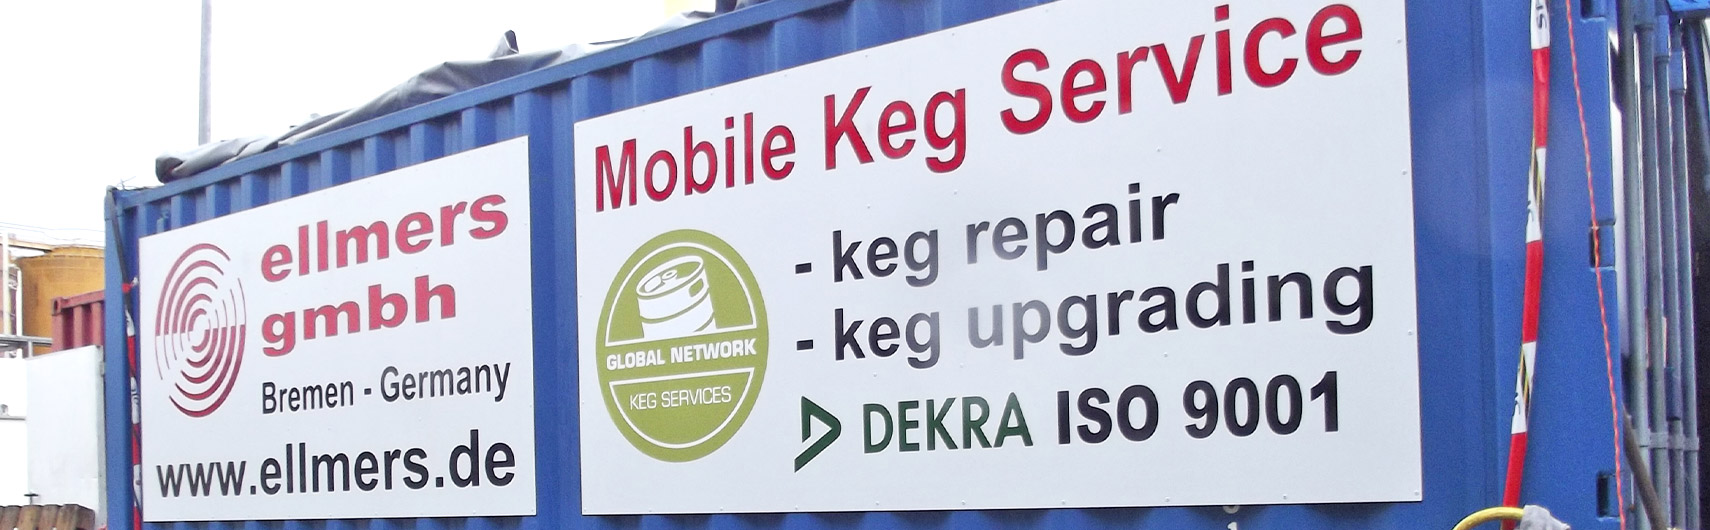 New collaboration with GNKS - ellmers GmbH - Mobiler Keg Reparaturservice